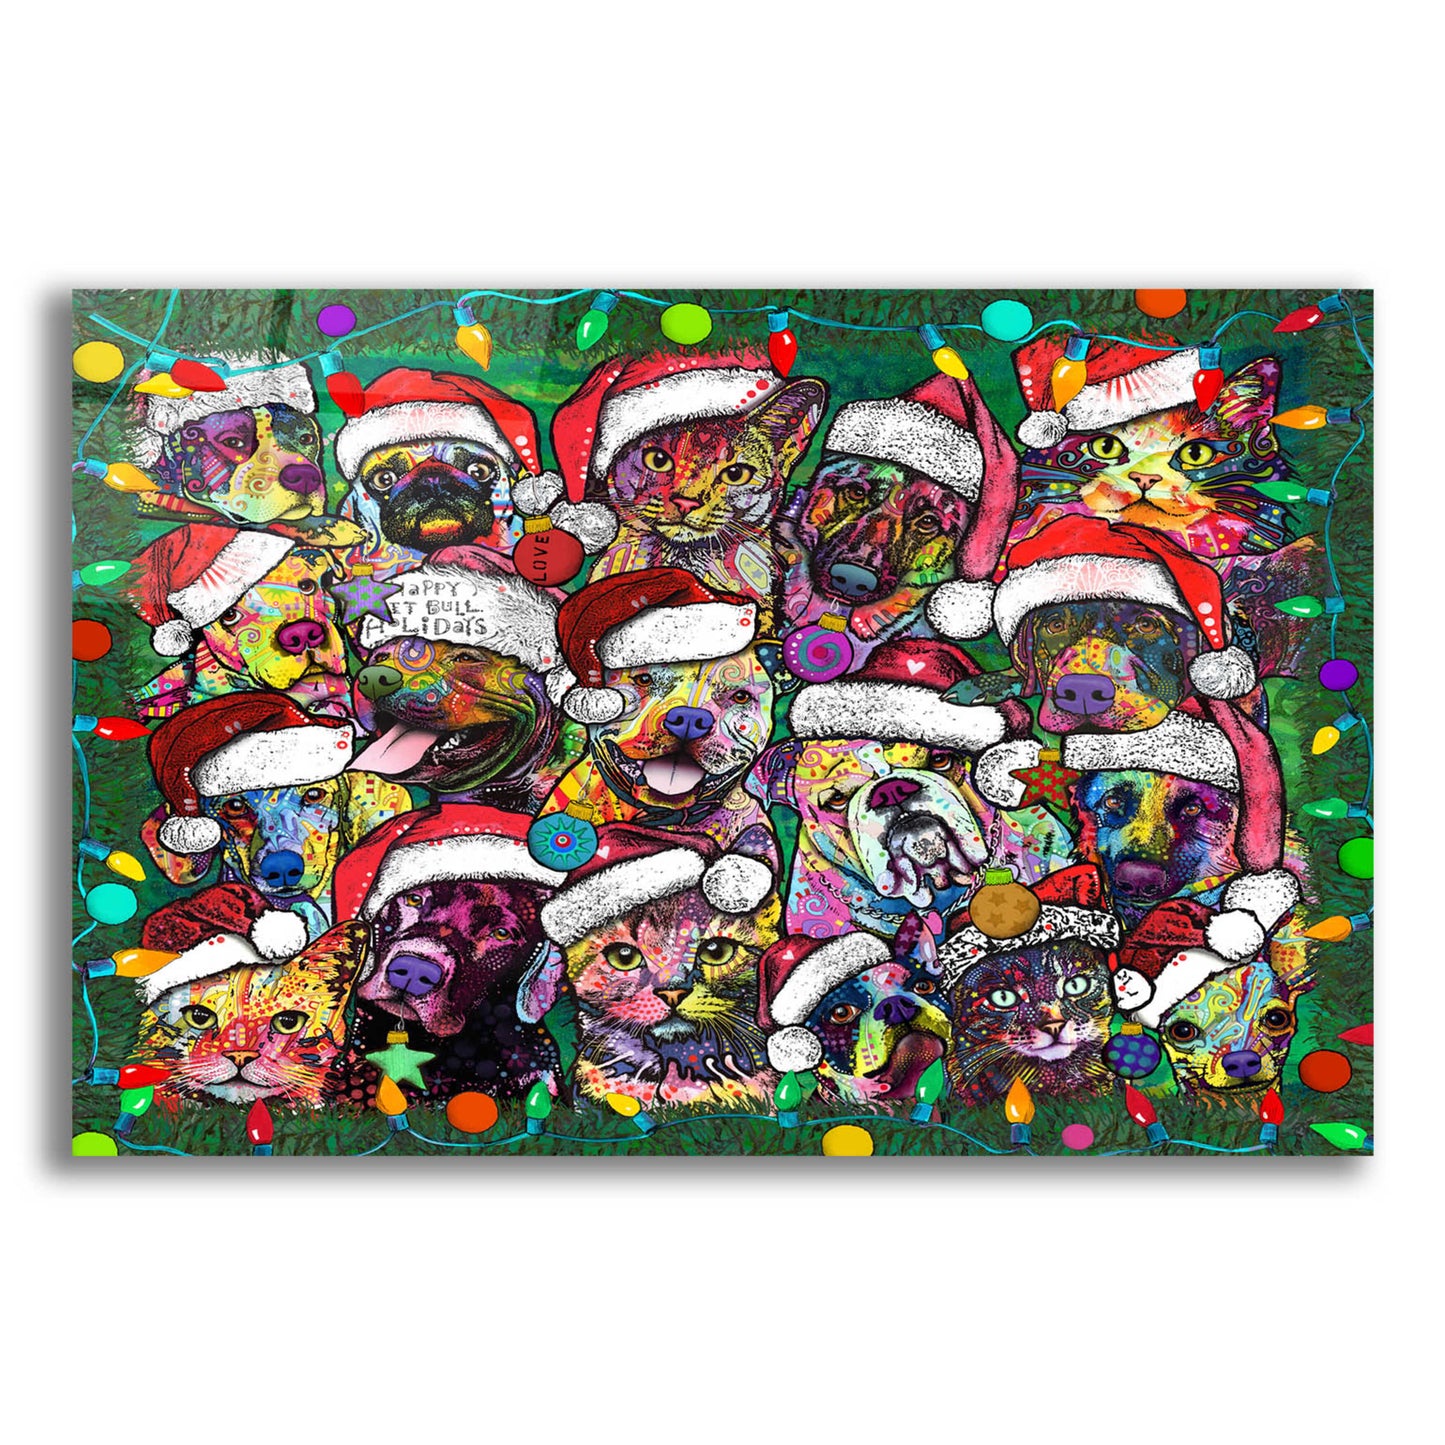 Epic Art 'Christmas Collage' by Dean Russo, Acrylic Glass Wall Art